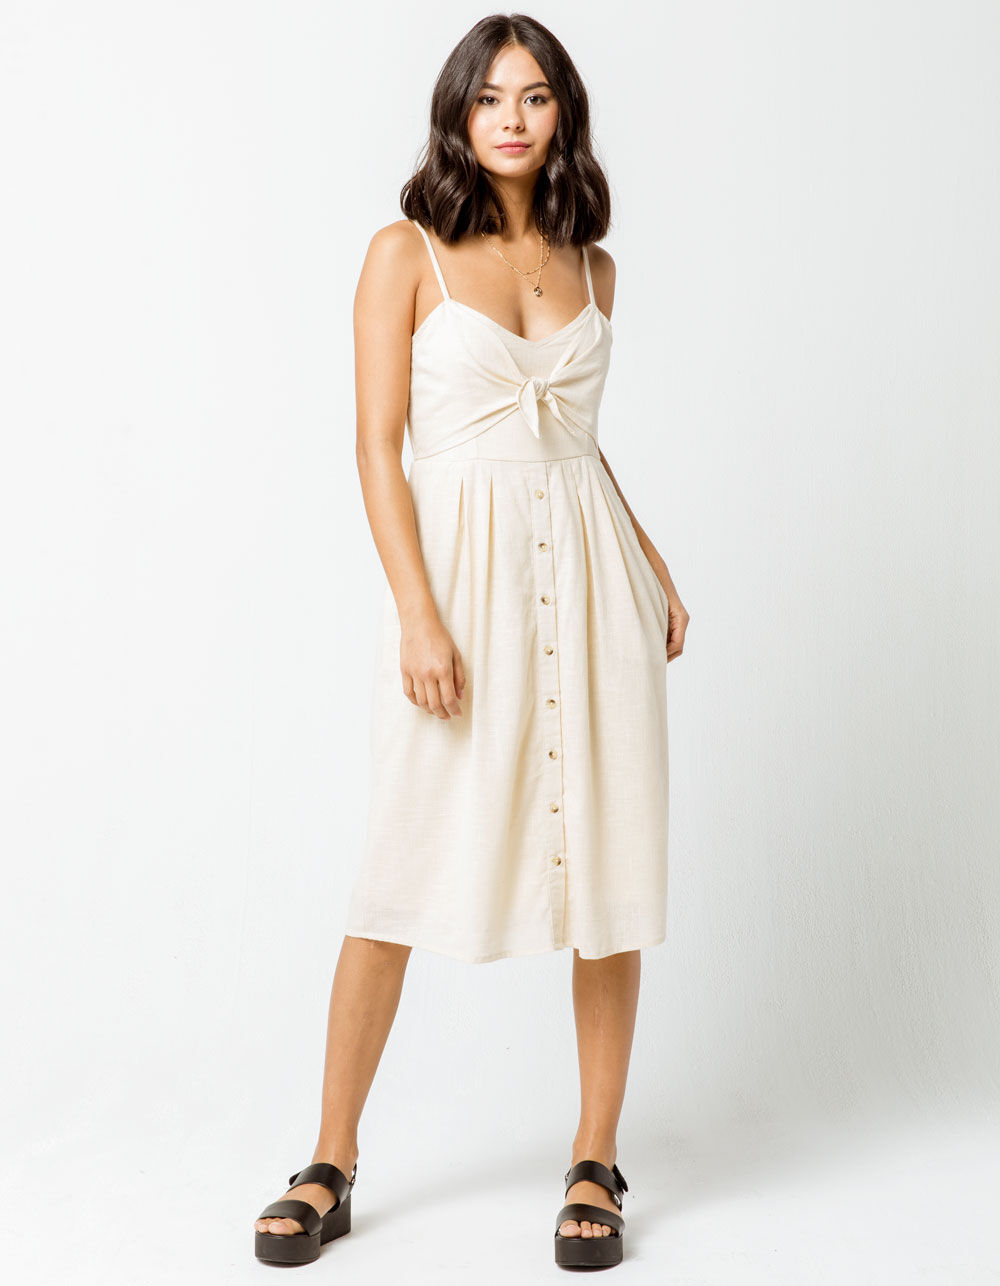 SKY AND SPARROW Knot Button Front Cream Midi Dress - CREAM | Tillys